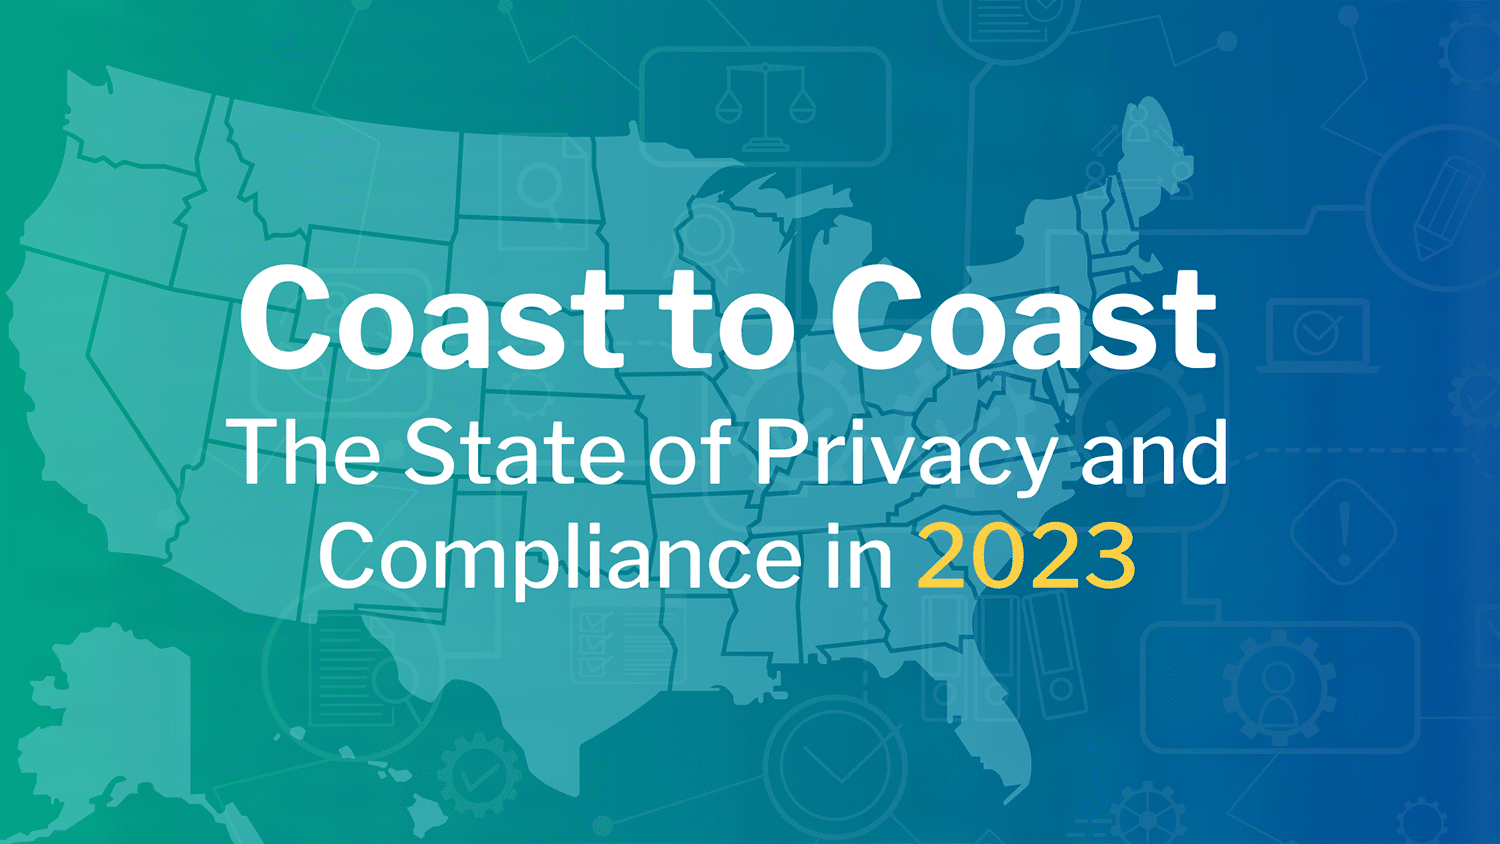 Coast to Coast: The State of Privacy and Compliance in 2023